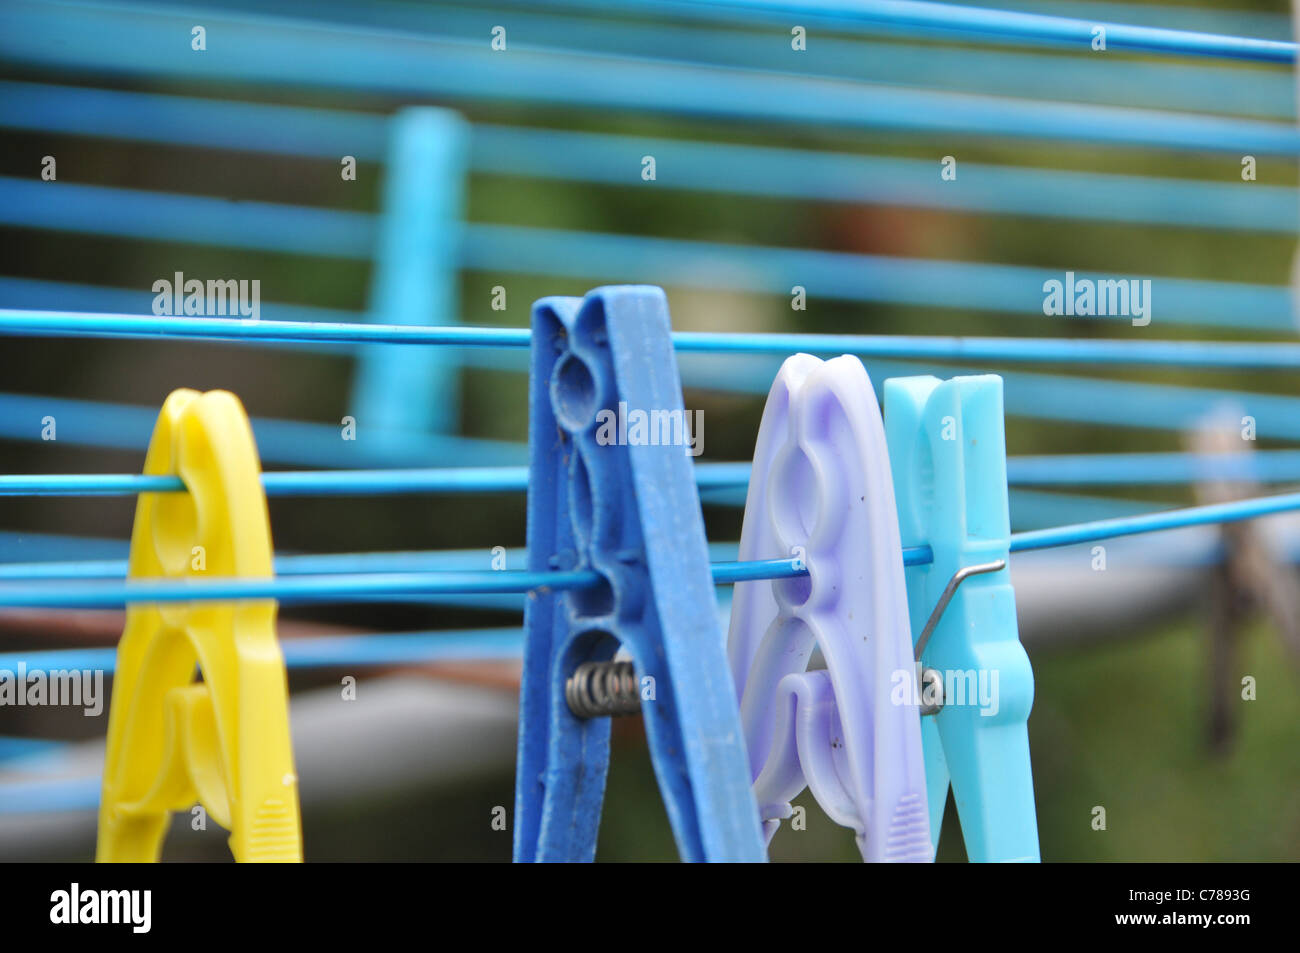 Clothes pegs washing line out of focus plastic bright colours Stock Photo